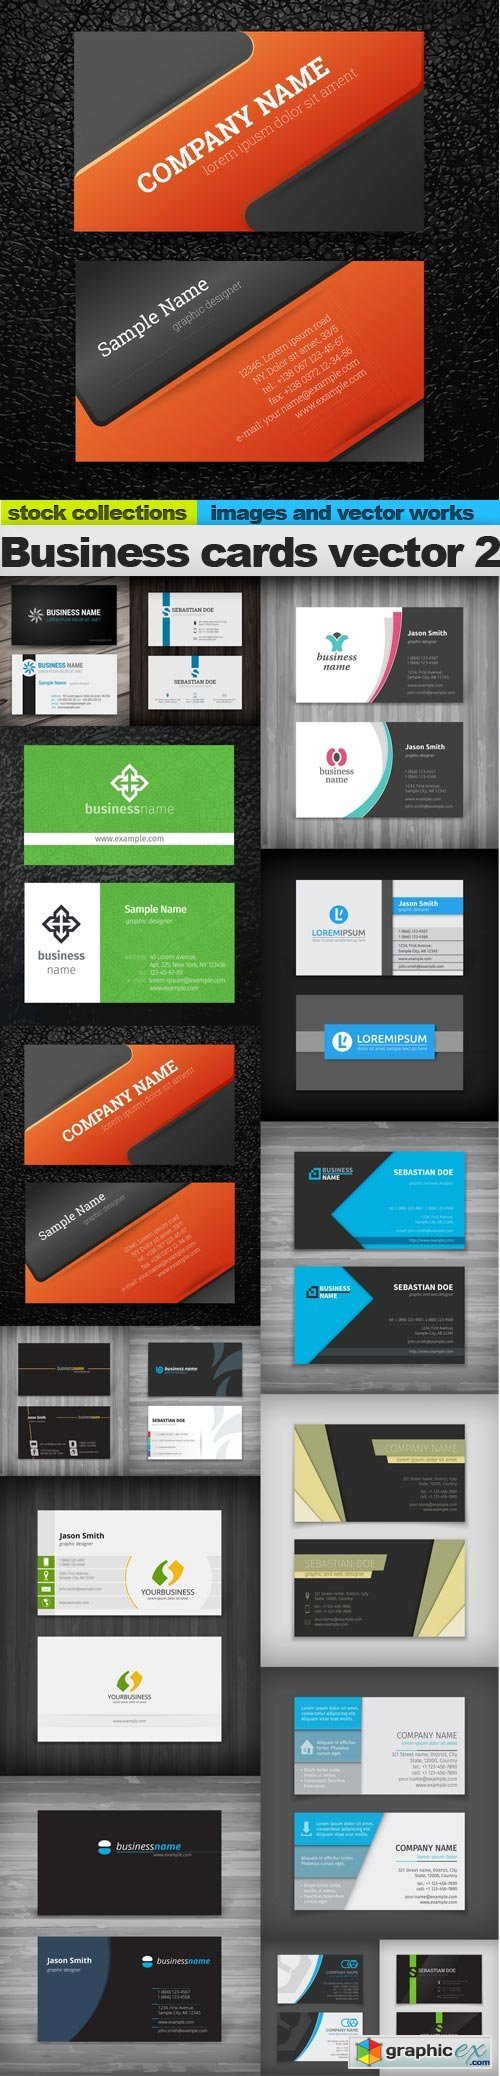 Business cards vector 2, 15 x EPS